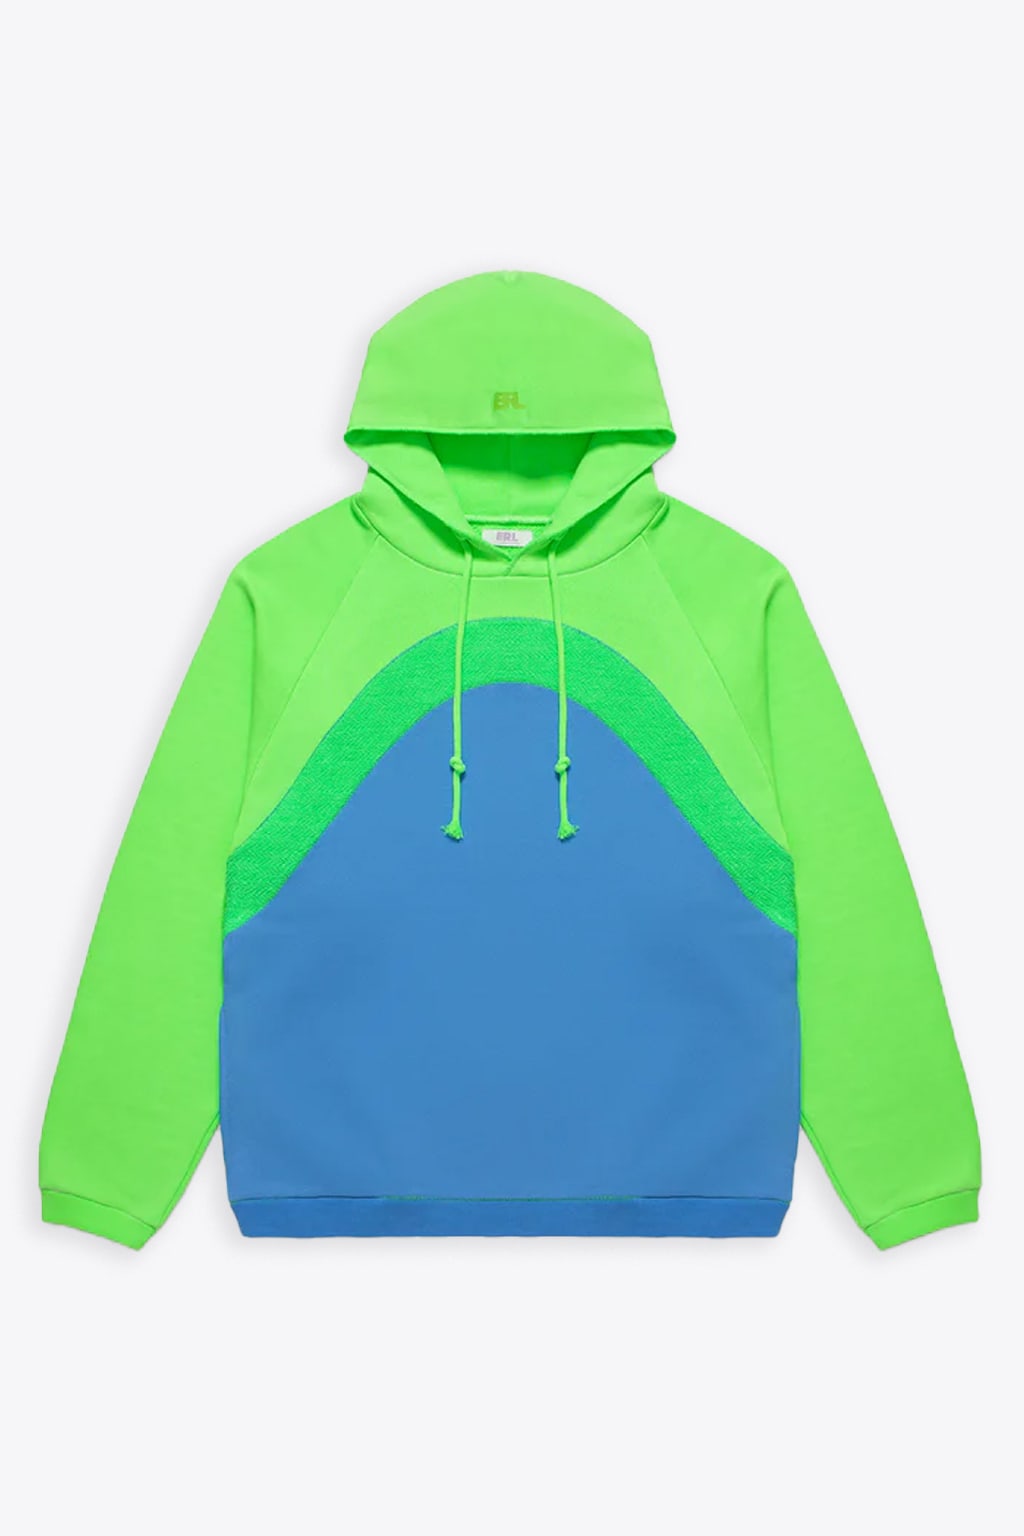 Unisex Raimbow Hoodie Knit Green and blue cotton hoodie - Unisex rainbow hoodie knit